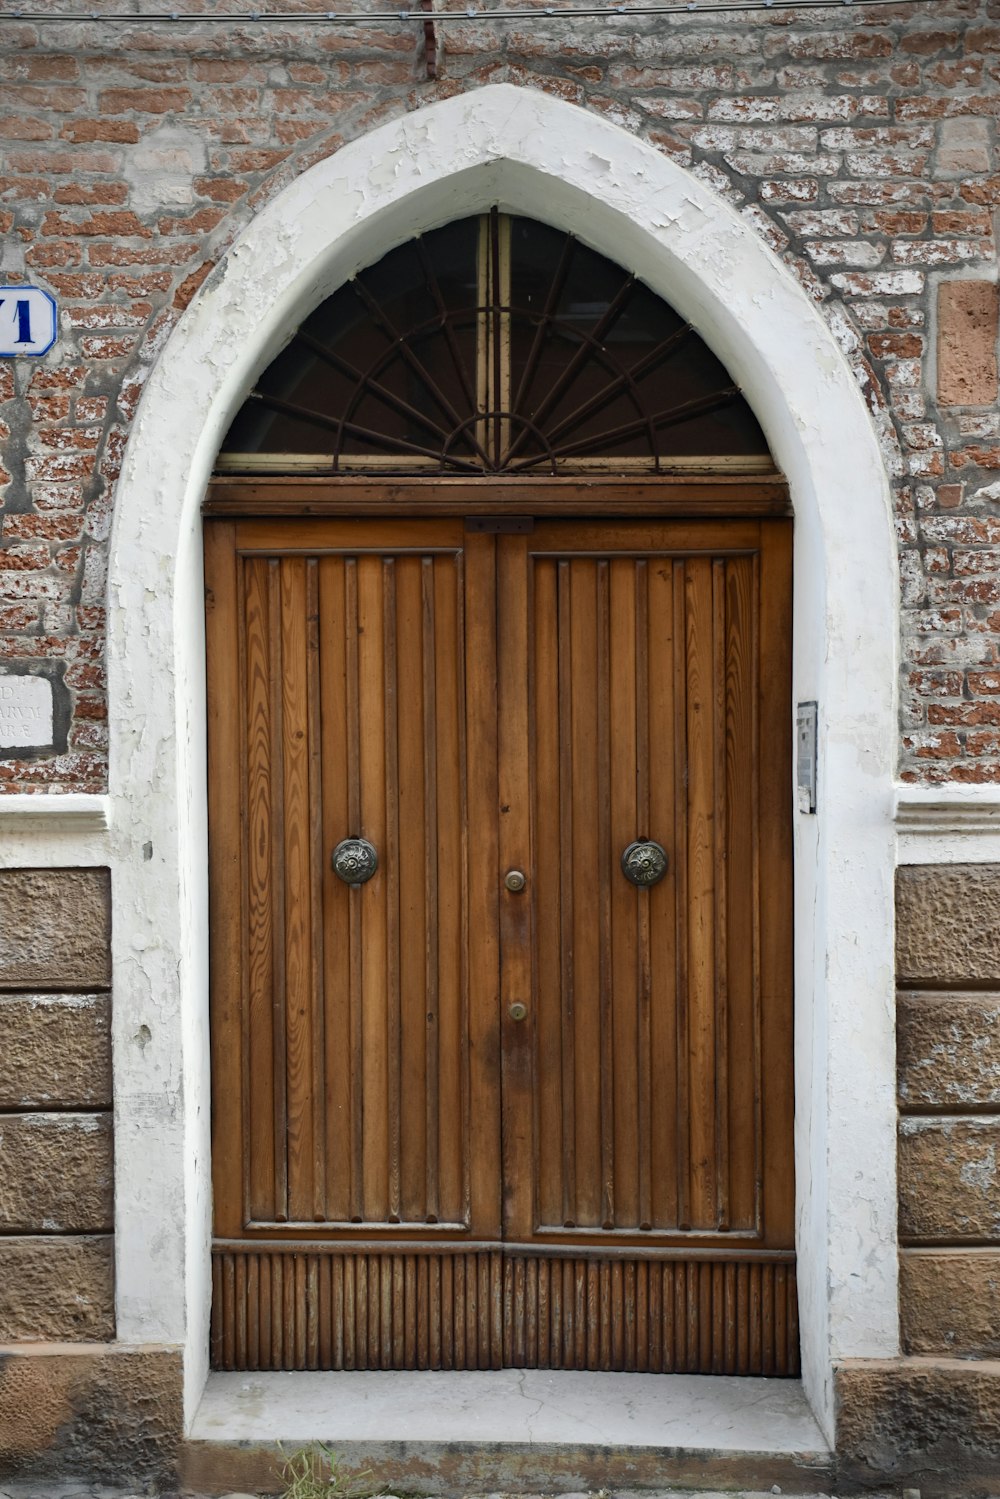 a large wooden door in a brick building